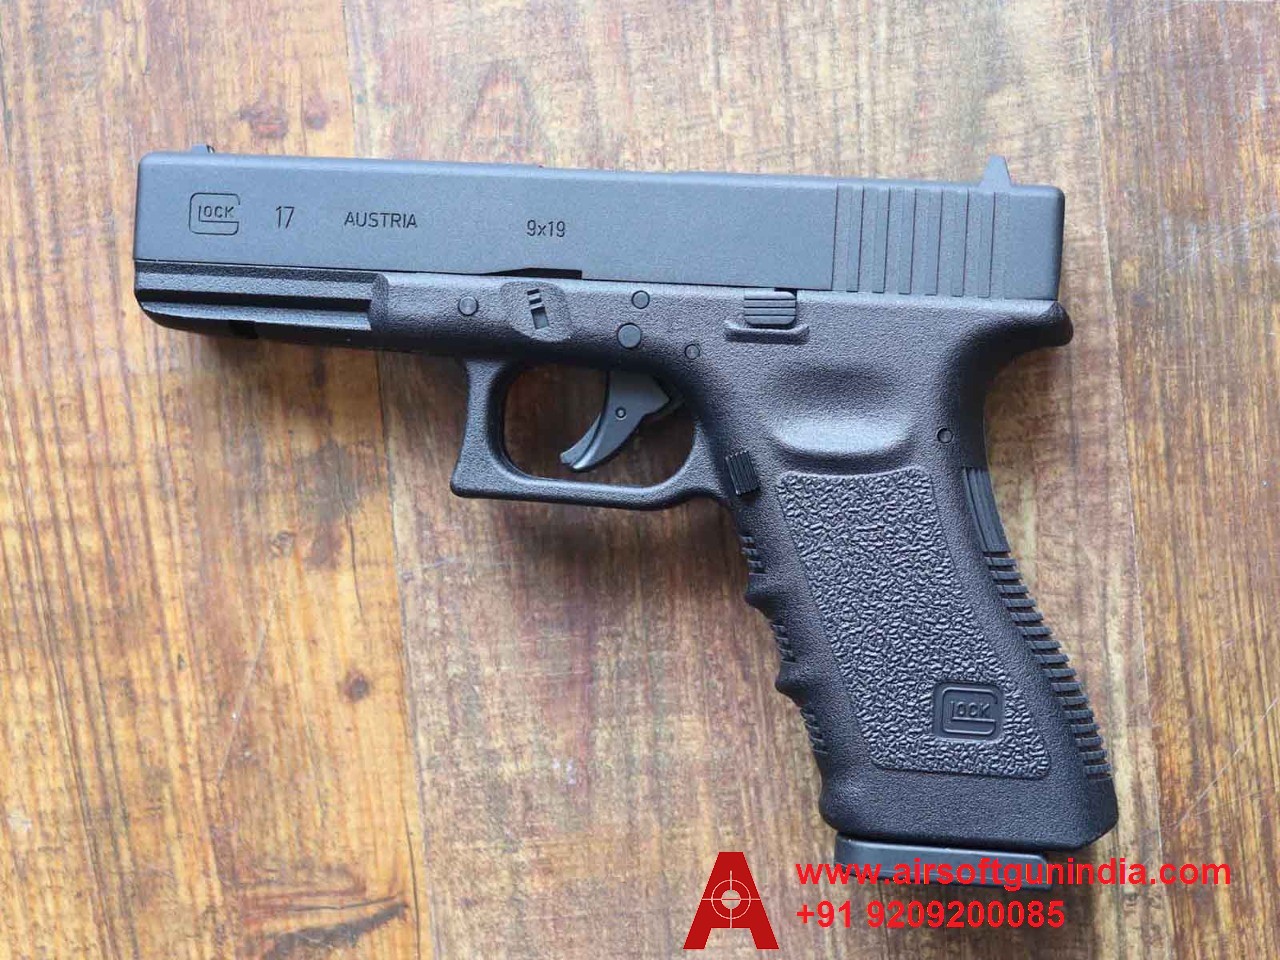 Glock 17 Generation 3 Co2 BB And Pellet .177Cal, 4.5mm Air Pistol By Airsoft Gun India